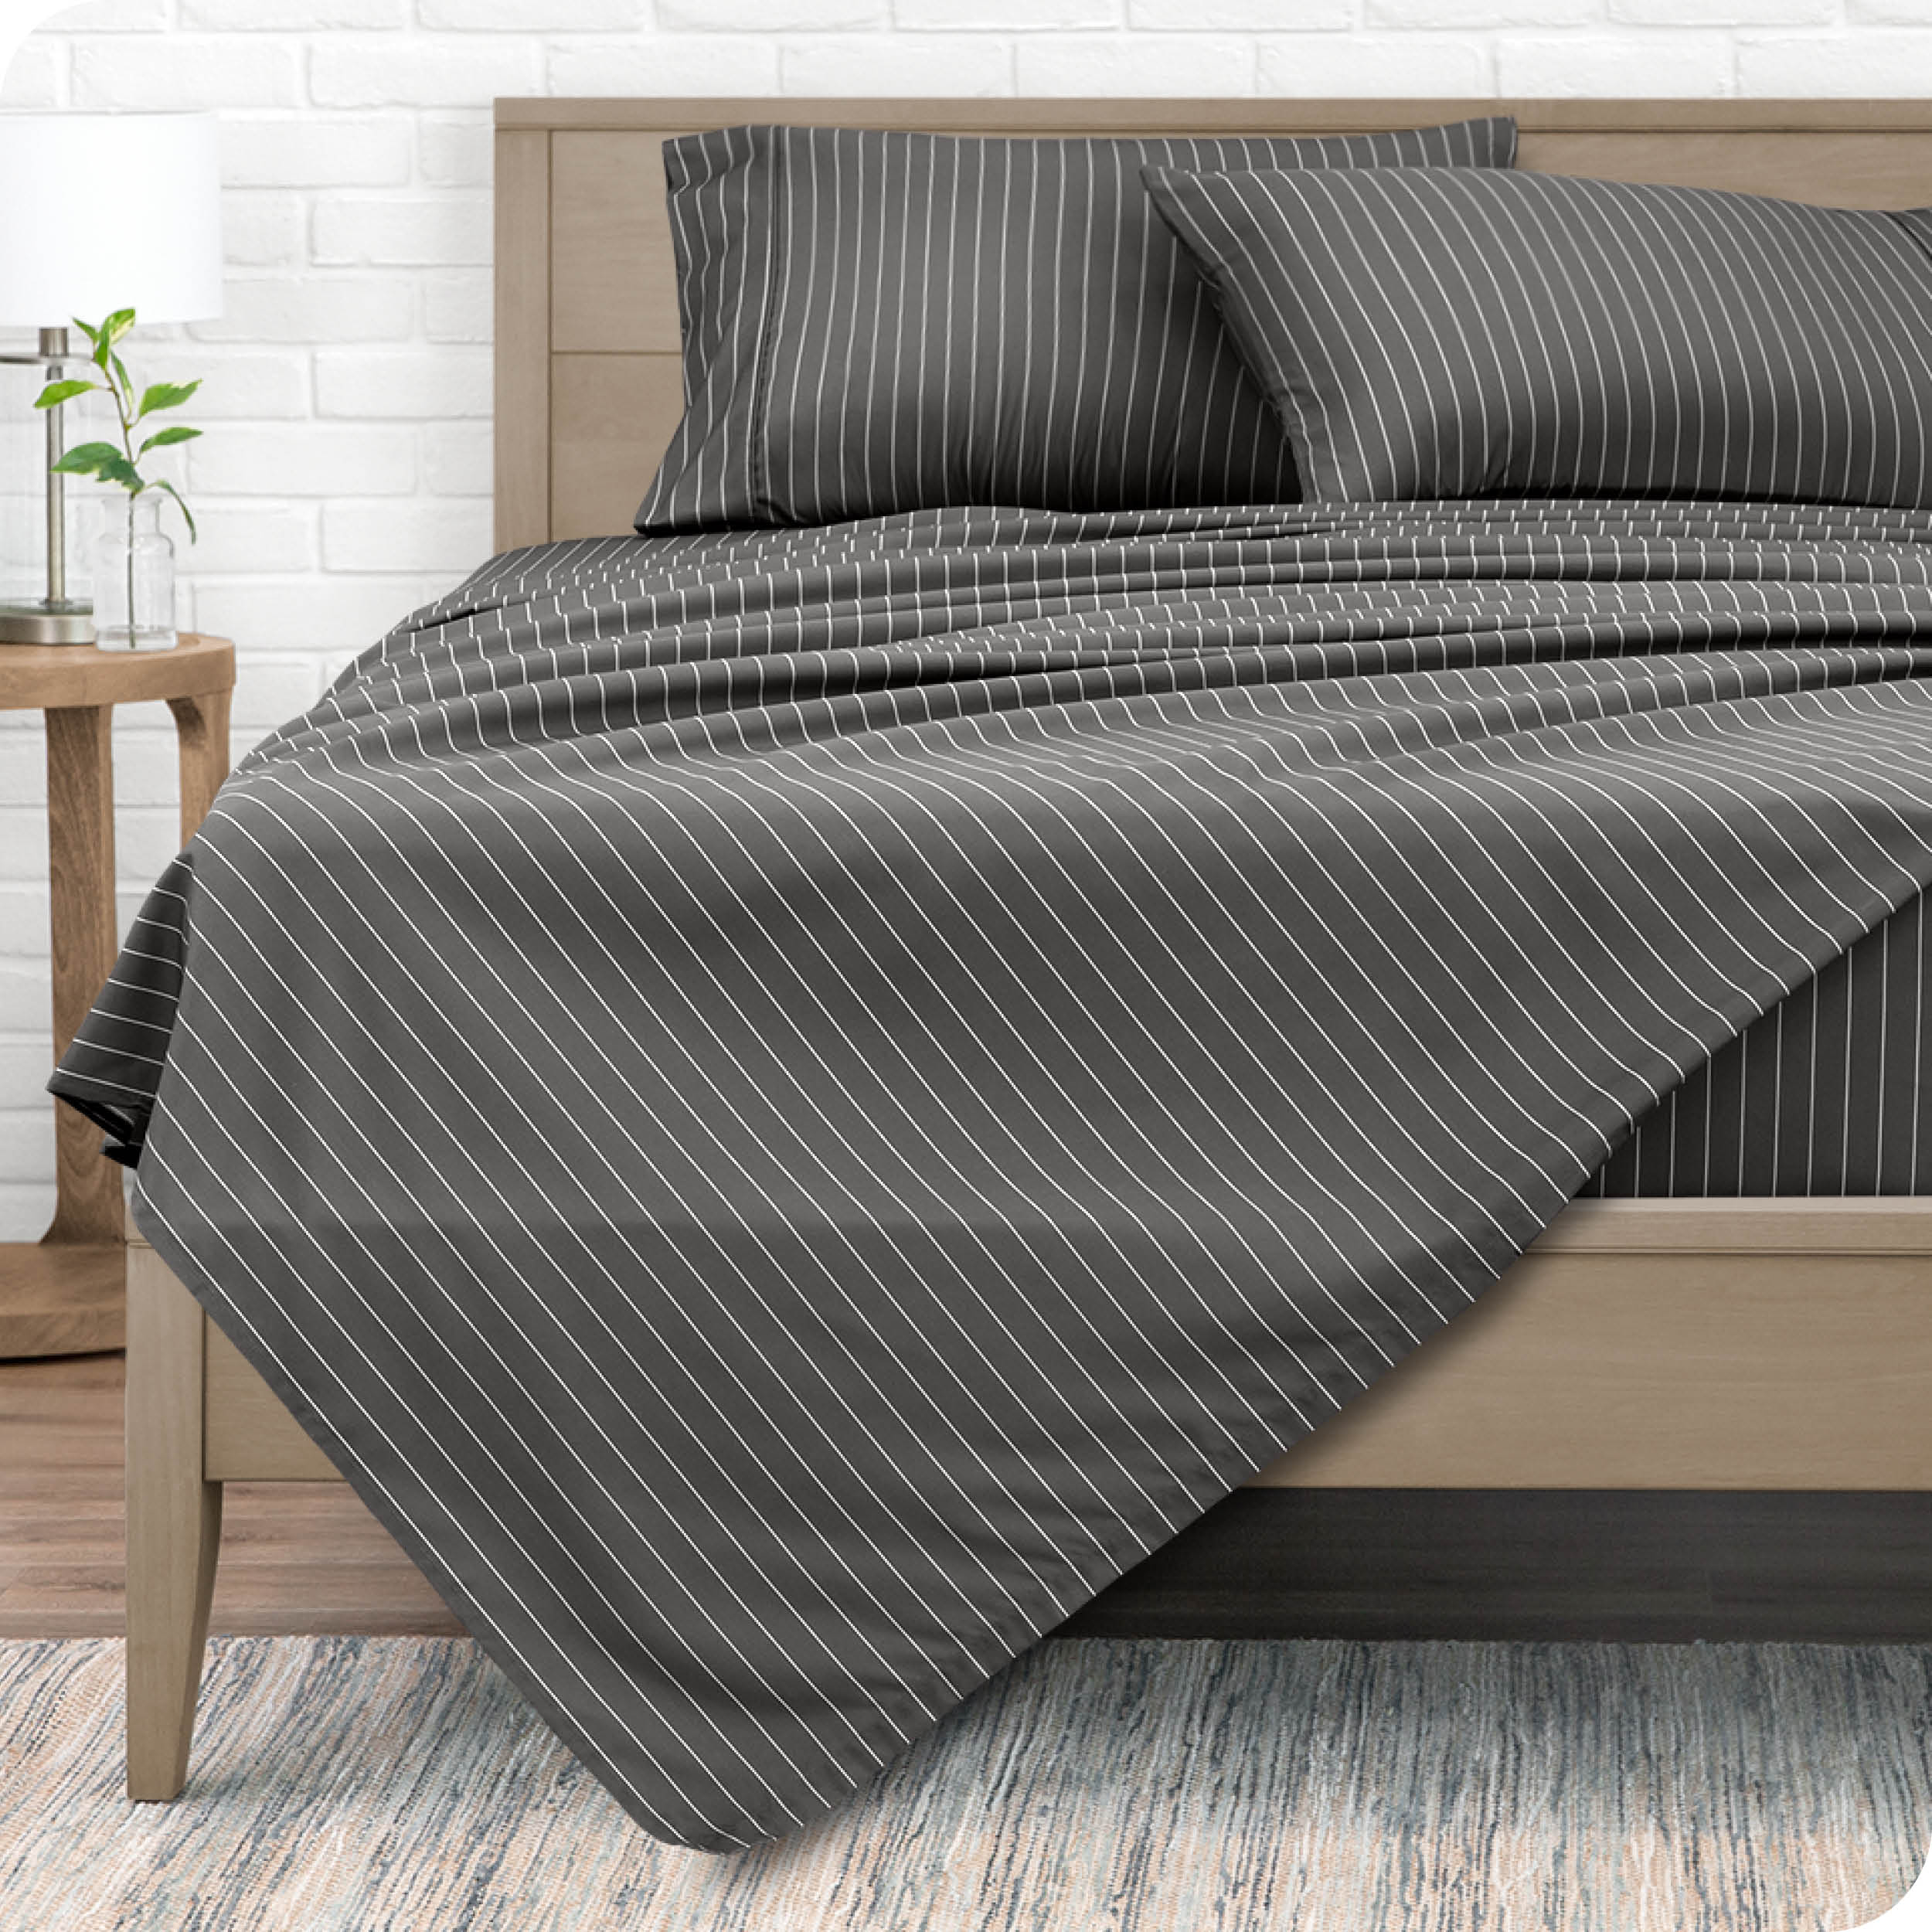 A modern bed with a microfiber sheet set on it.